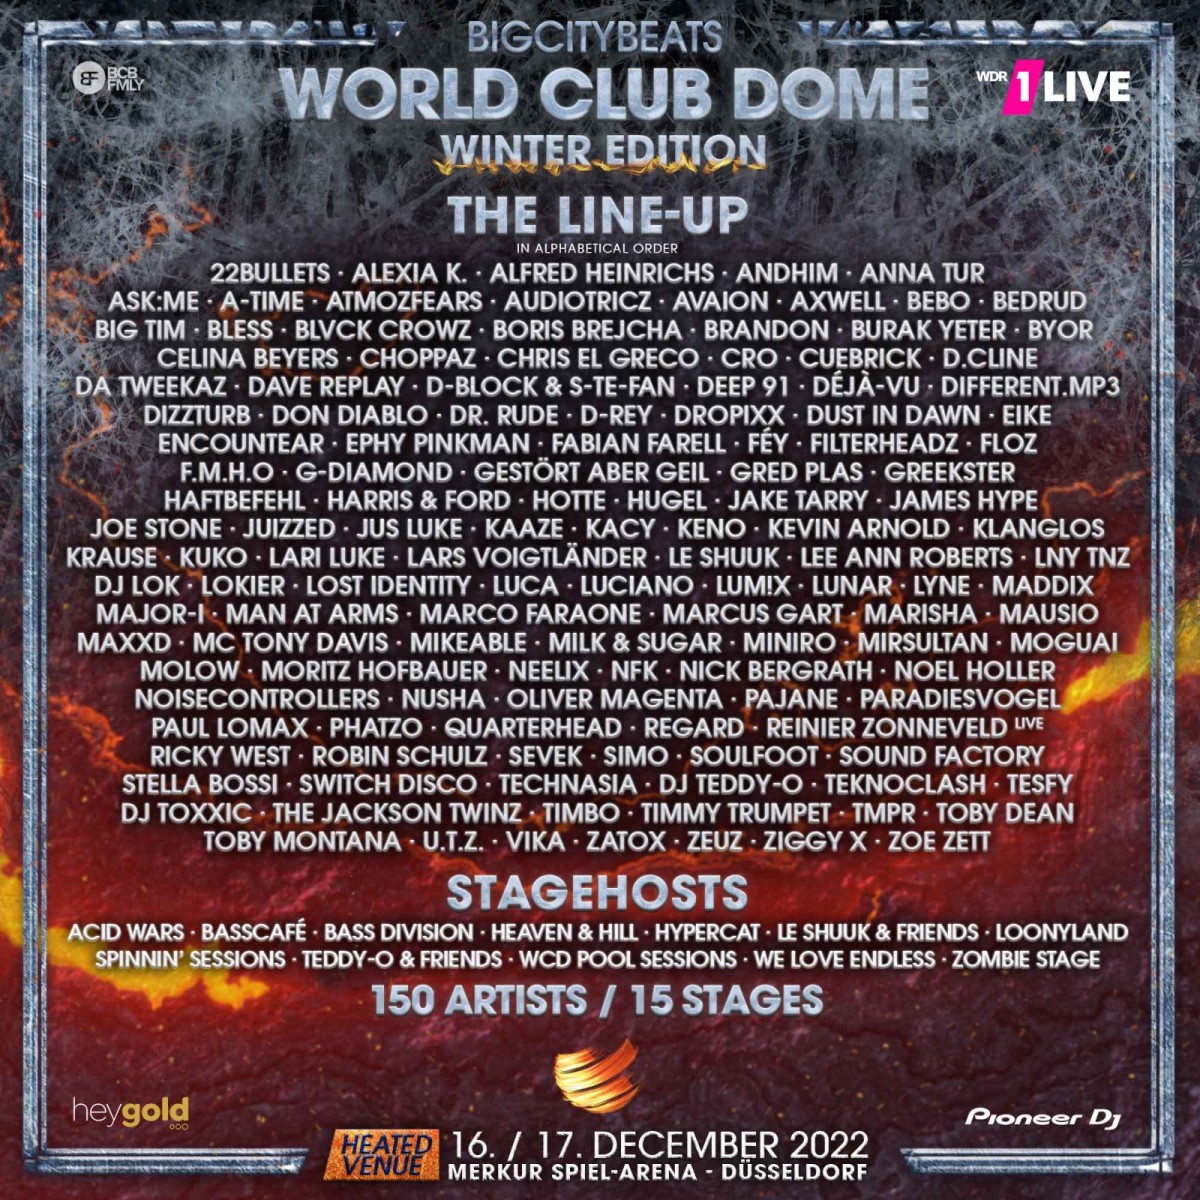 World Club Dome: Winter Edition 2022 - Lineup. 